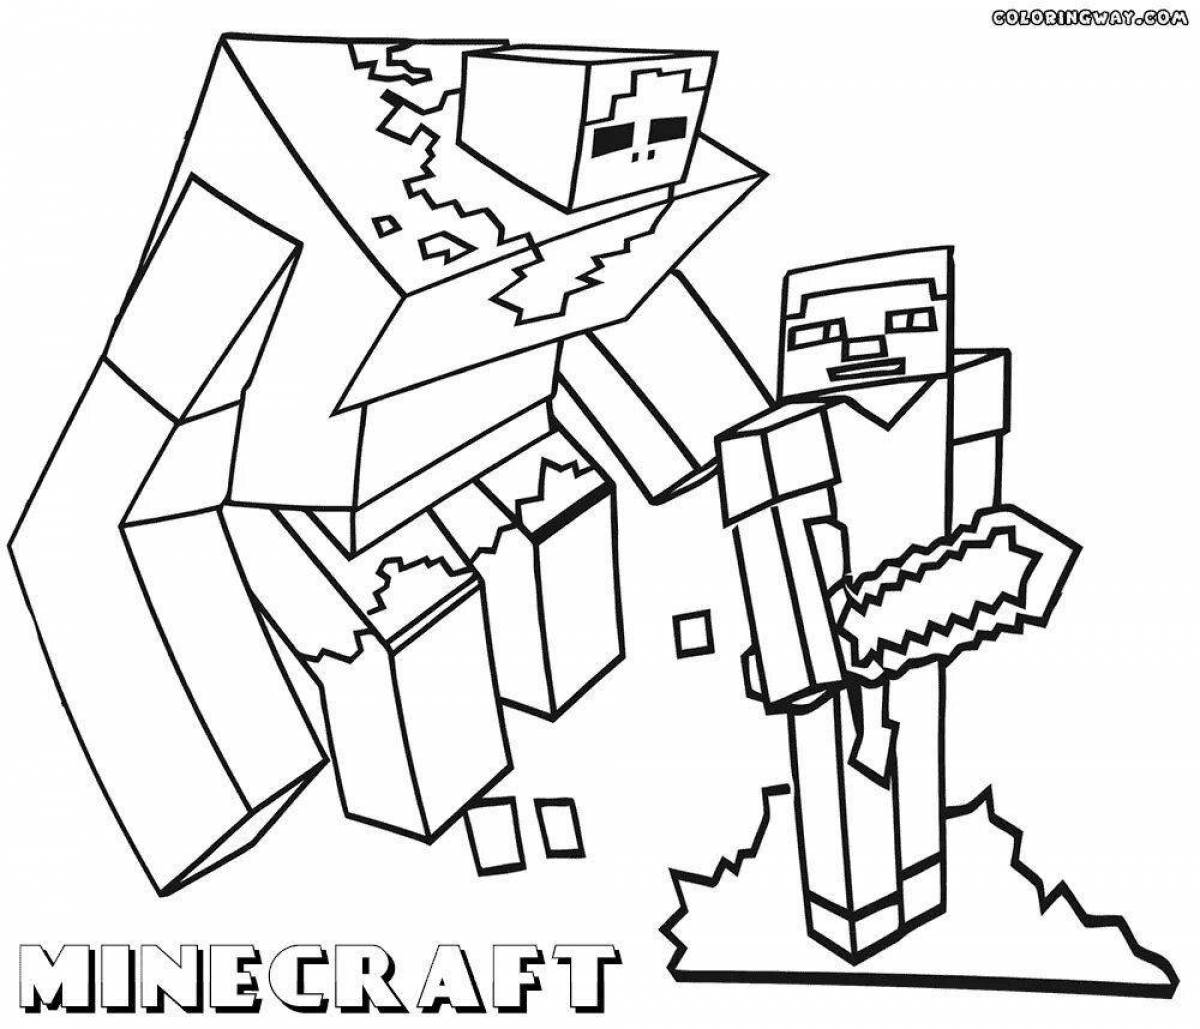 Playful minecraft zombies coloring page